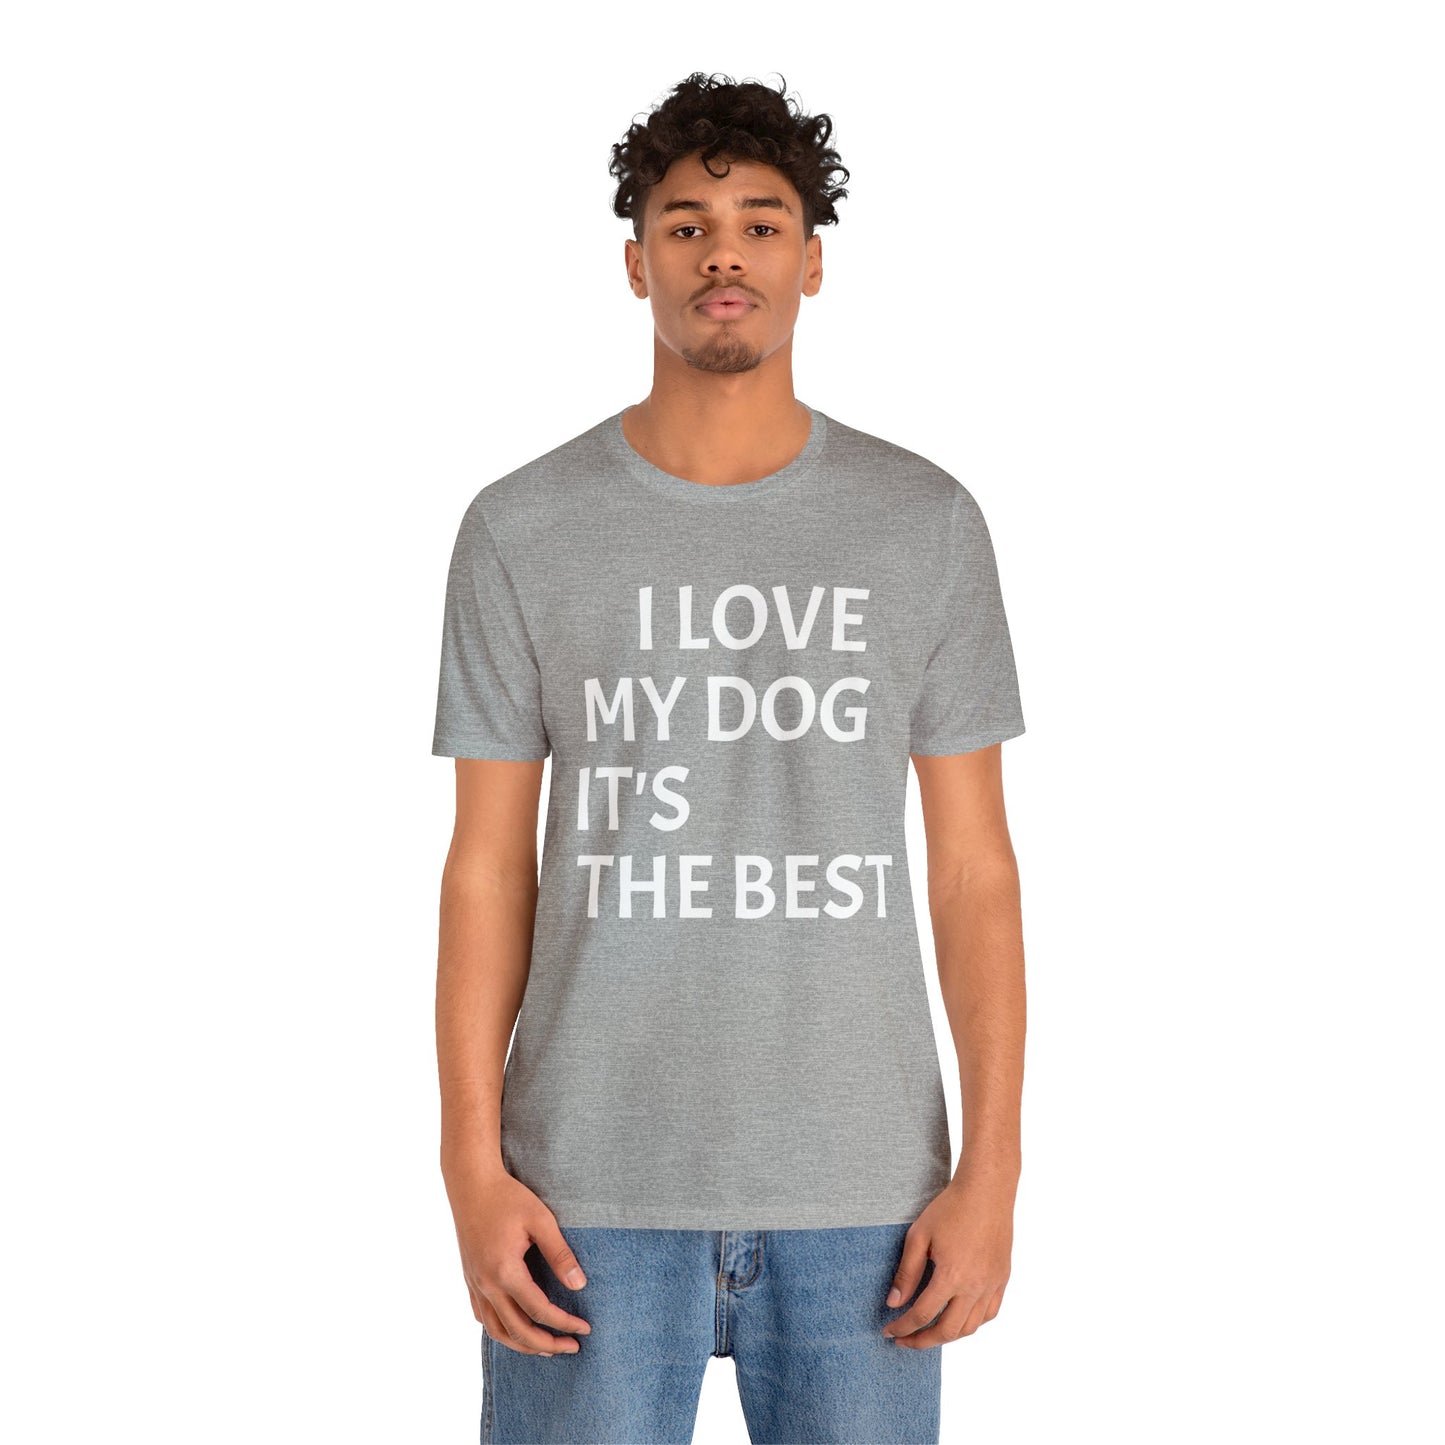 T-Shirt Tshirt Gift for Friends and Family Short Sleeve T Shirt for Dog Lovers Petrova Designs